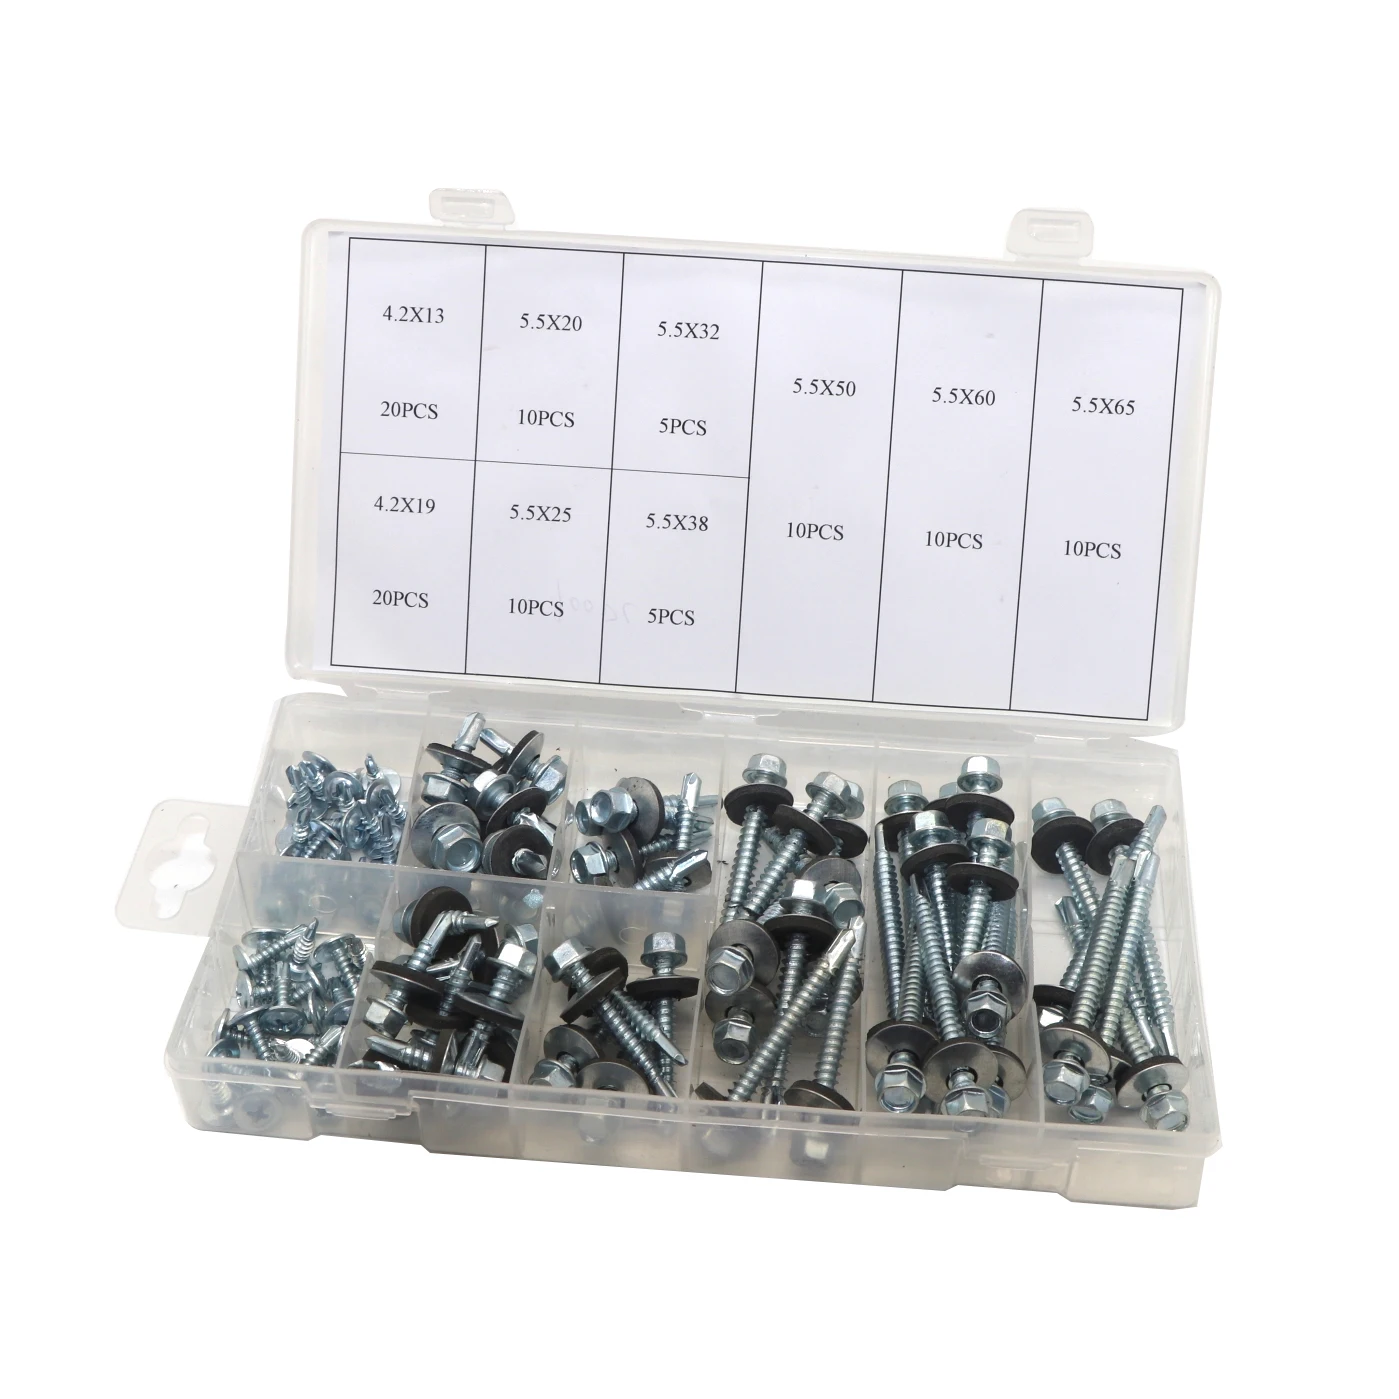 100PC ASSORTED ROUND HEAD TAPPING SCREW